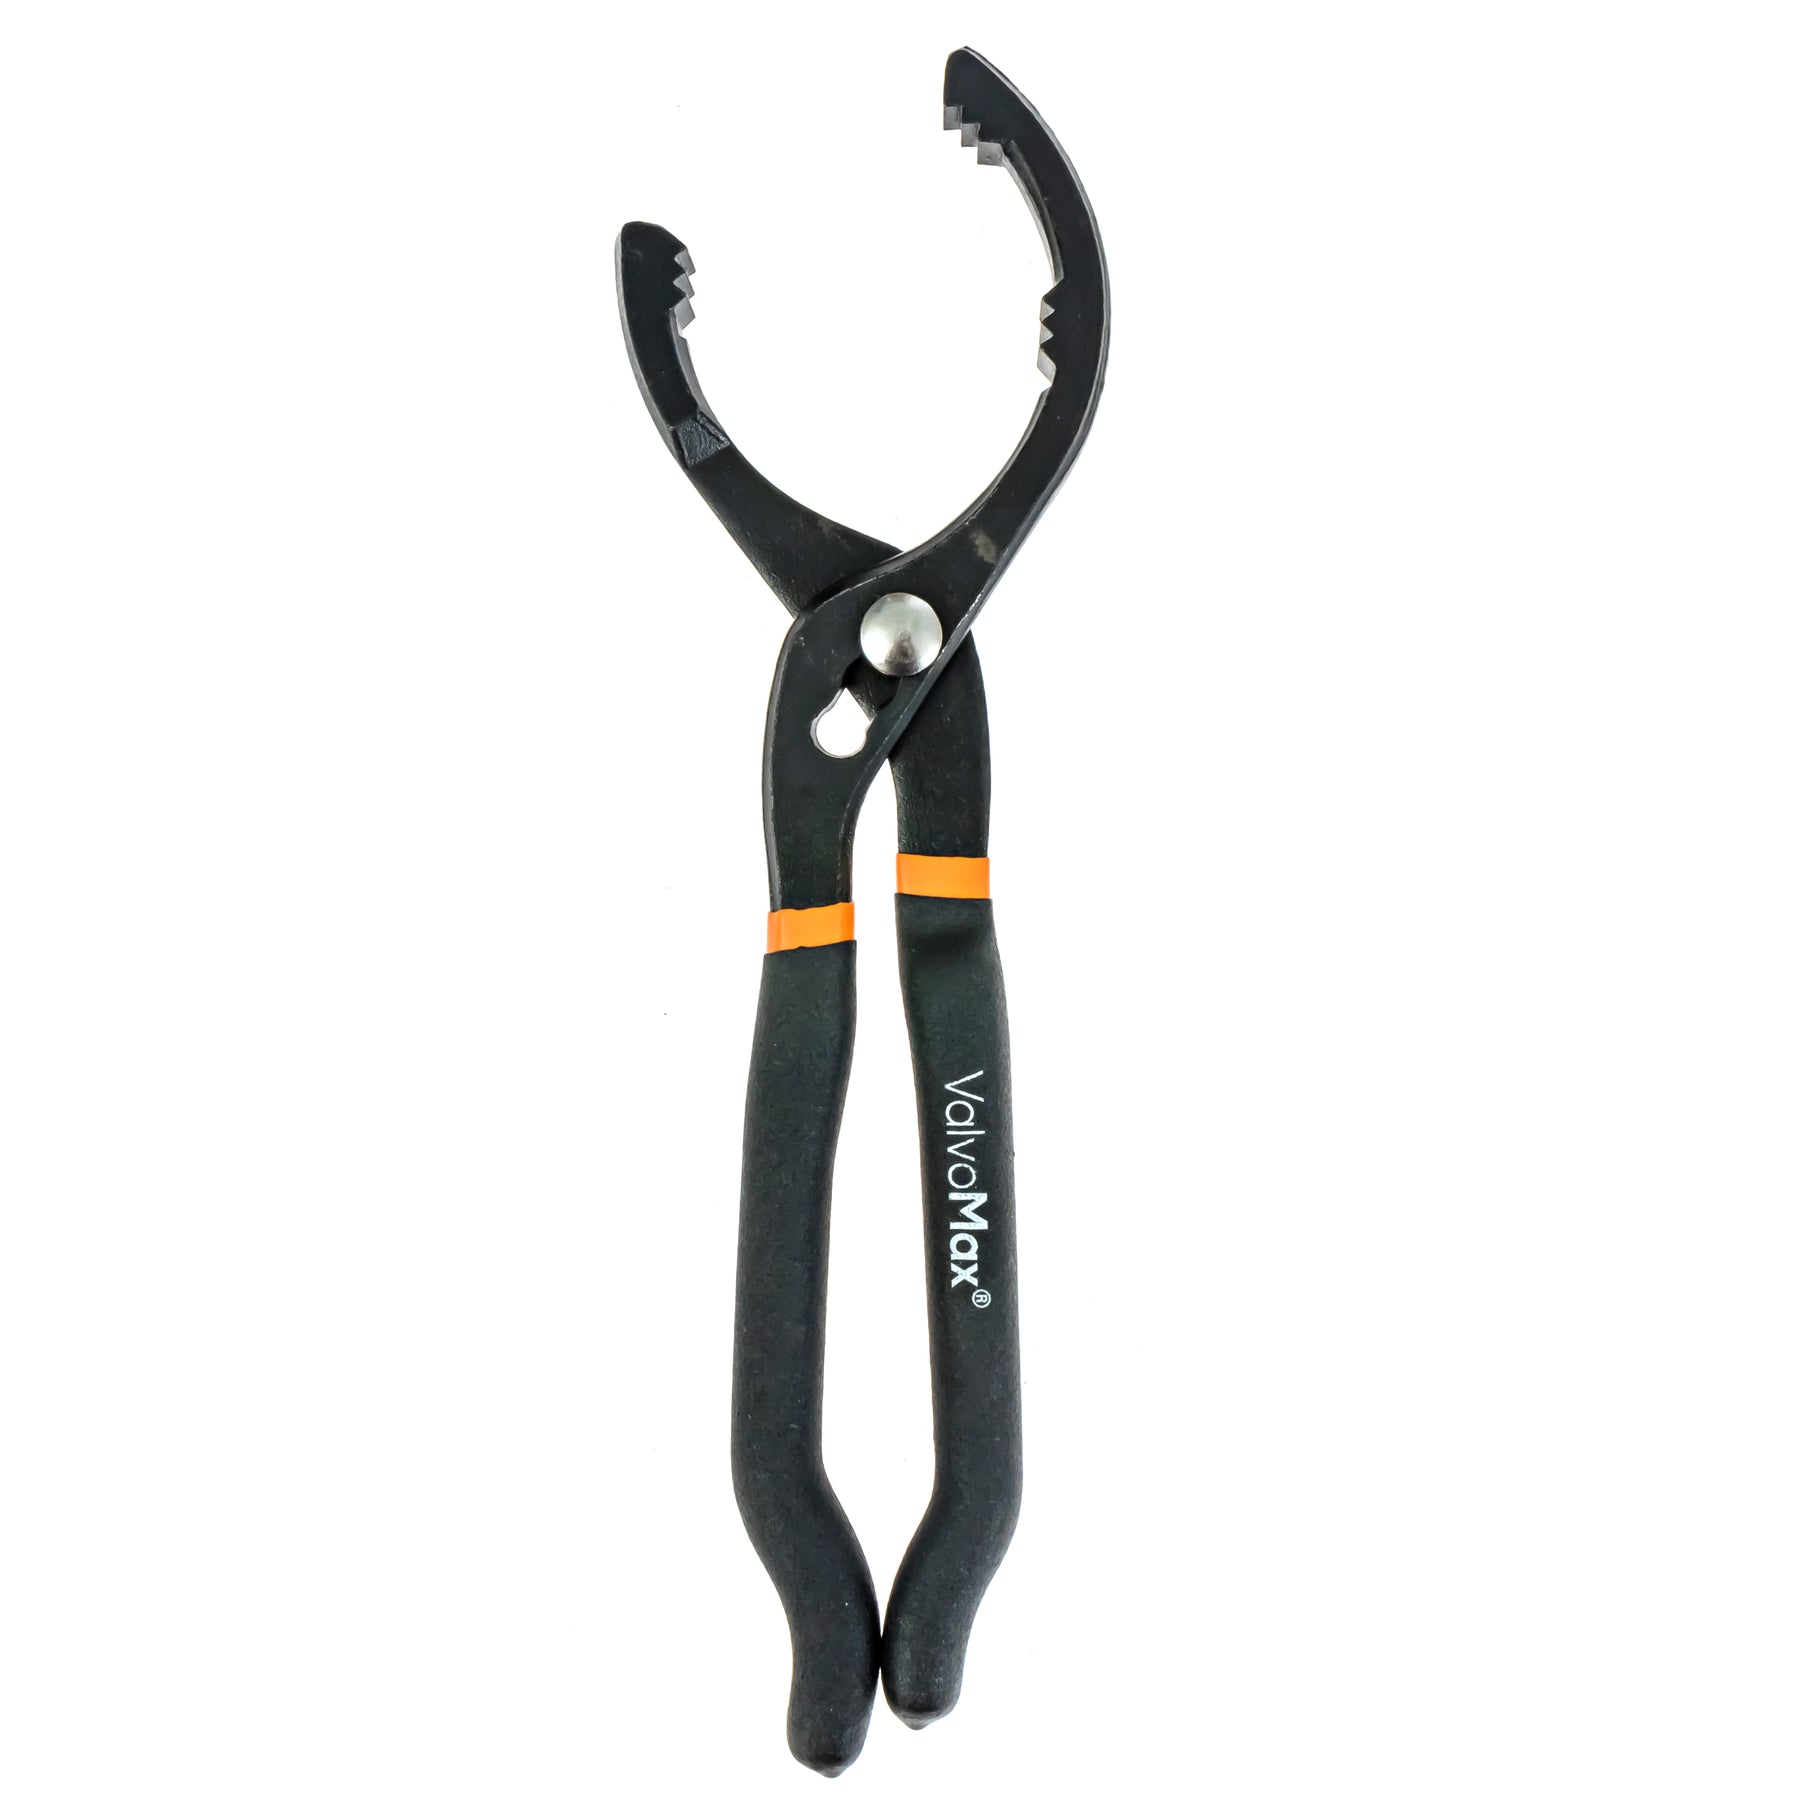 Oil Filter Pliers Oil Filter Wrench Adjustable Oil Filter Strap Wrench  Removal Tool For Motorcycles, Cars, Trucks 1pc